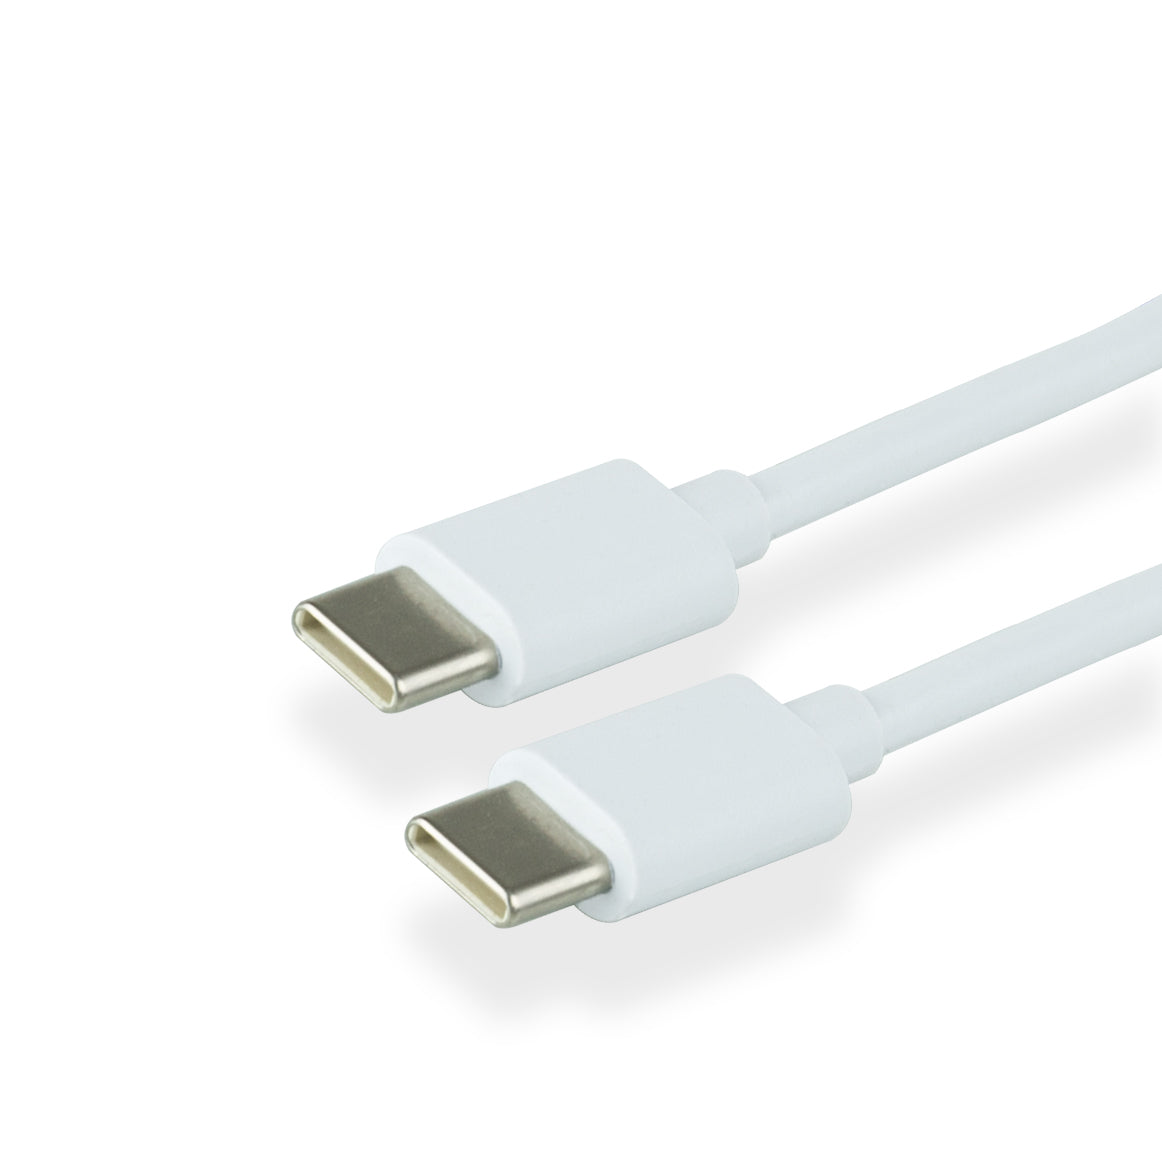 Greenmouse USB-C to USB-C Data Cable